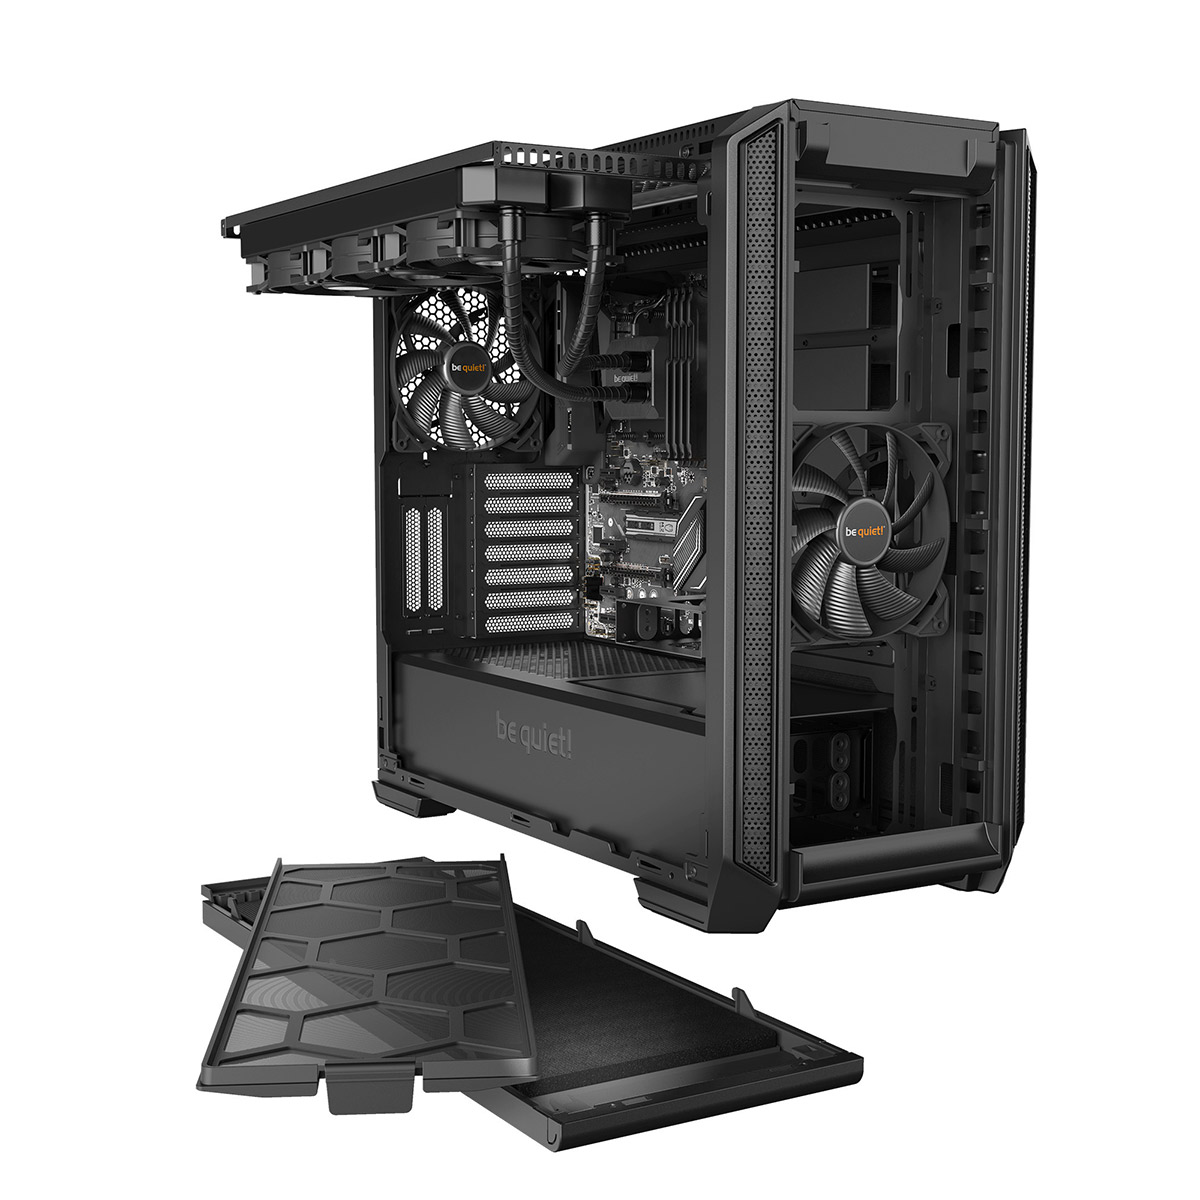 be quiet! - B Grade be quiet! Silent Base 601 Midi-Tower Case - Black Tempered Glass